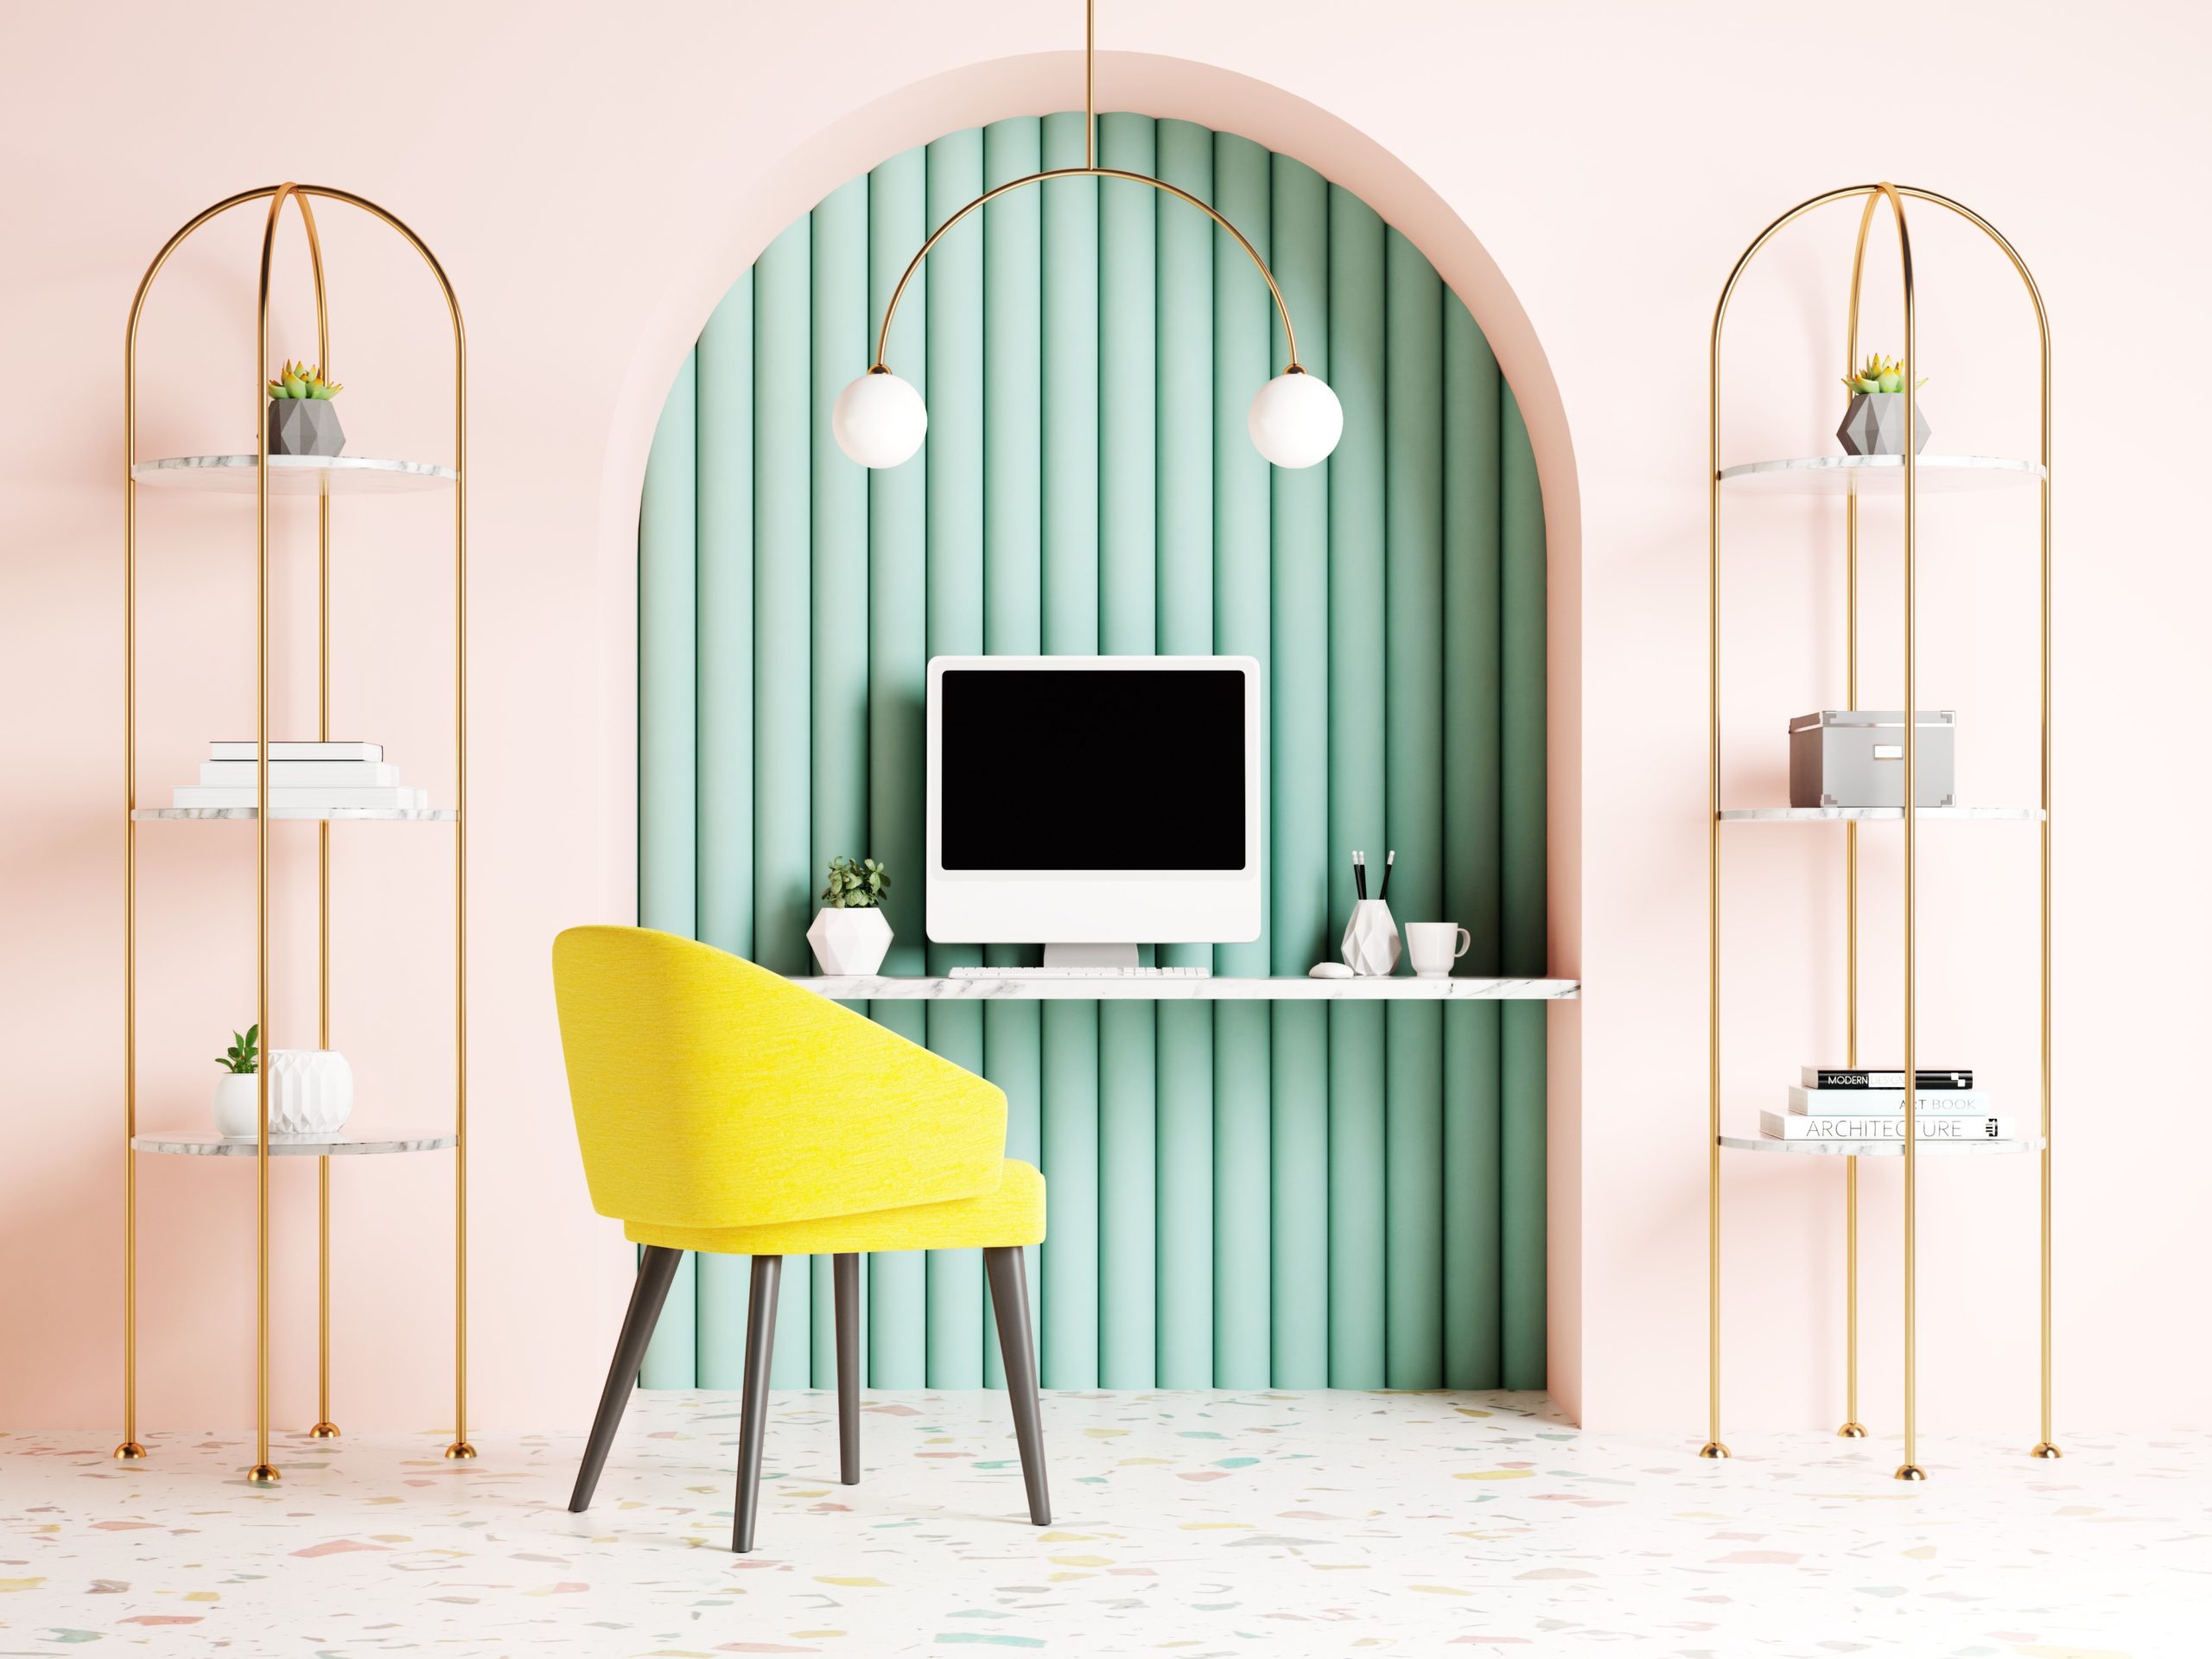 <img src="pink.jpg" alt="pink and green office with chair"/> 